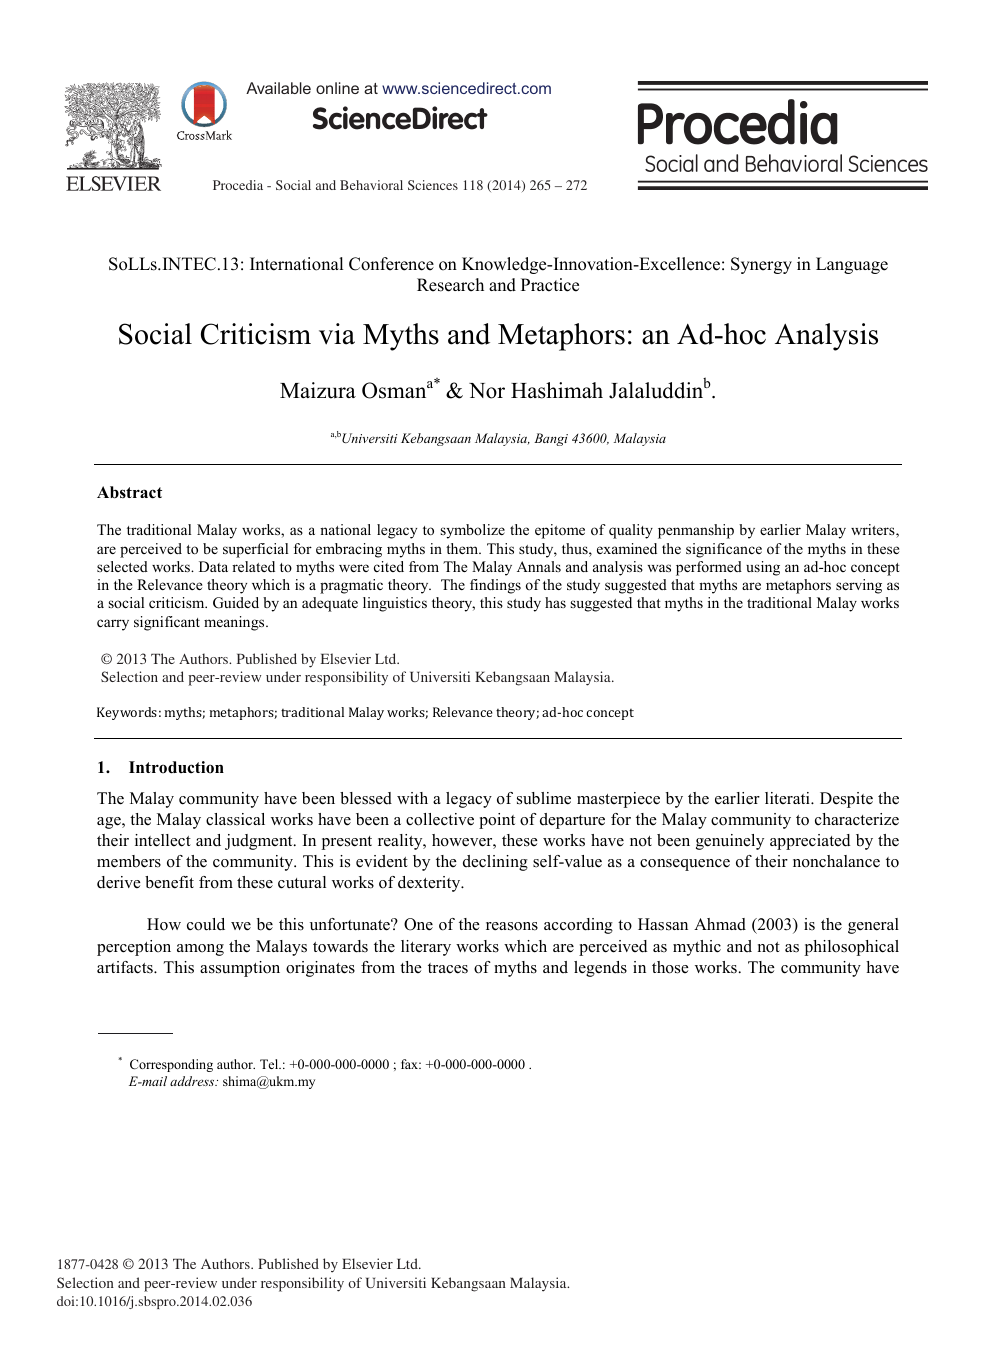 Social Criticism Via Myths And Metaphors An Ad Hoc Analysis Topic Of Research Paper In History And Archaeology Download Scholarly Article Pdf And Read For Free On Cyberleninka Open Science Hub